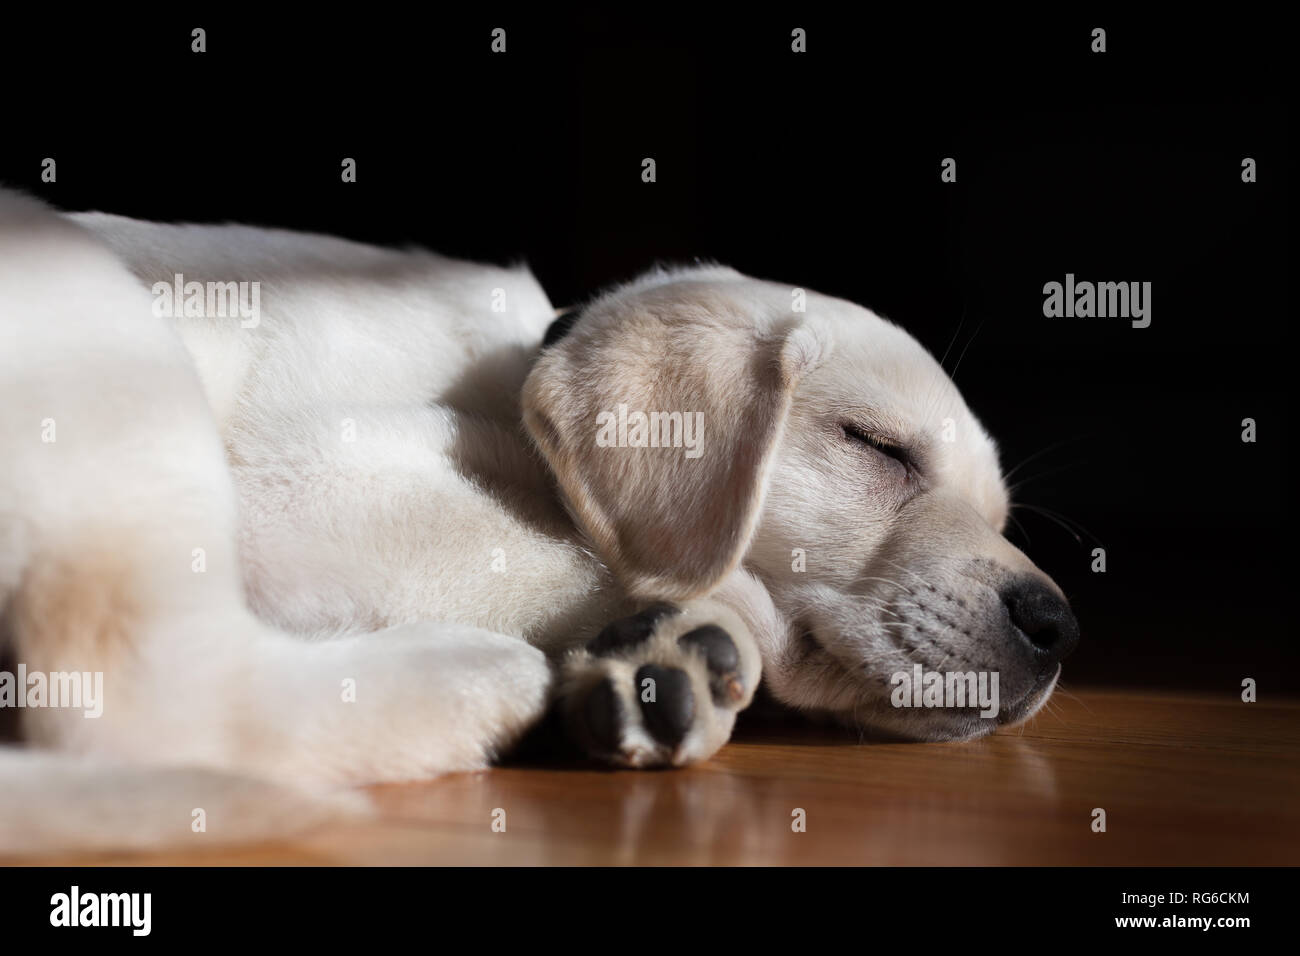 Adorable 9-week old yellow labrador puppy sleeping peacefully on a hardwood floor. The sun filters in through a window onto the sweet puppy's face. Stock Photo